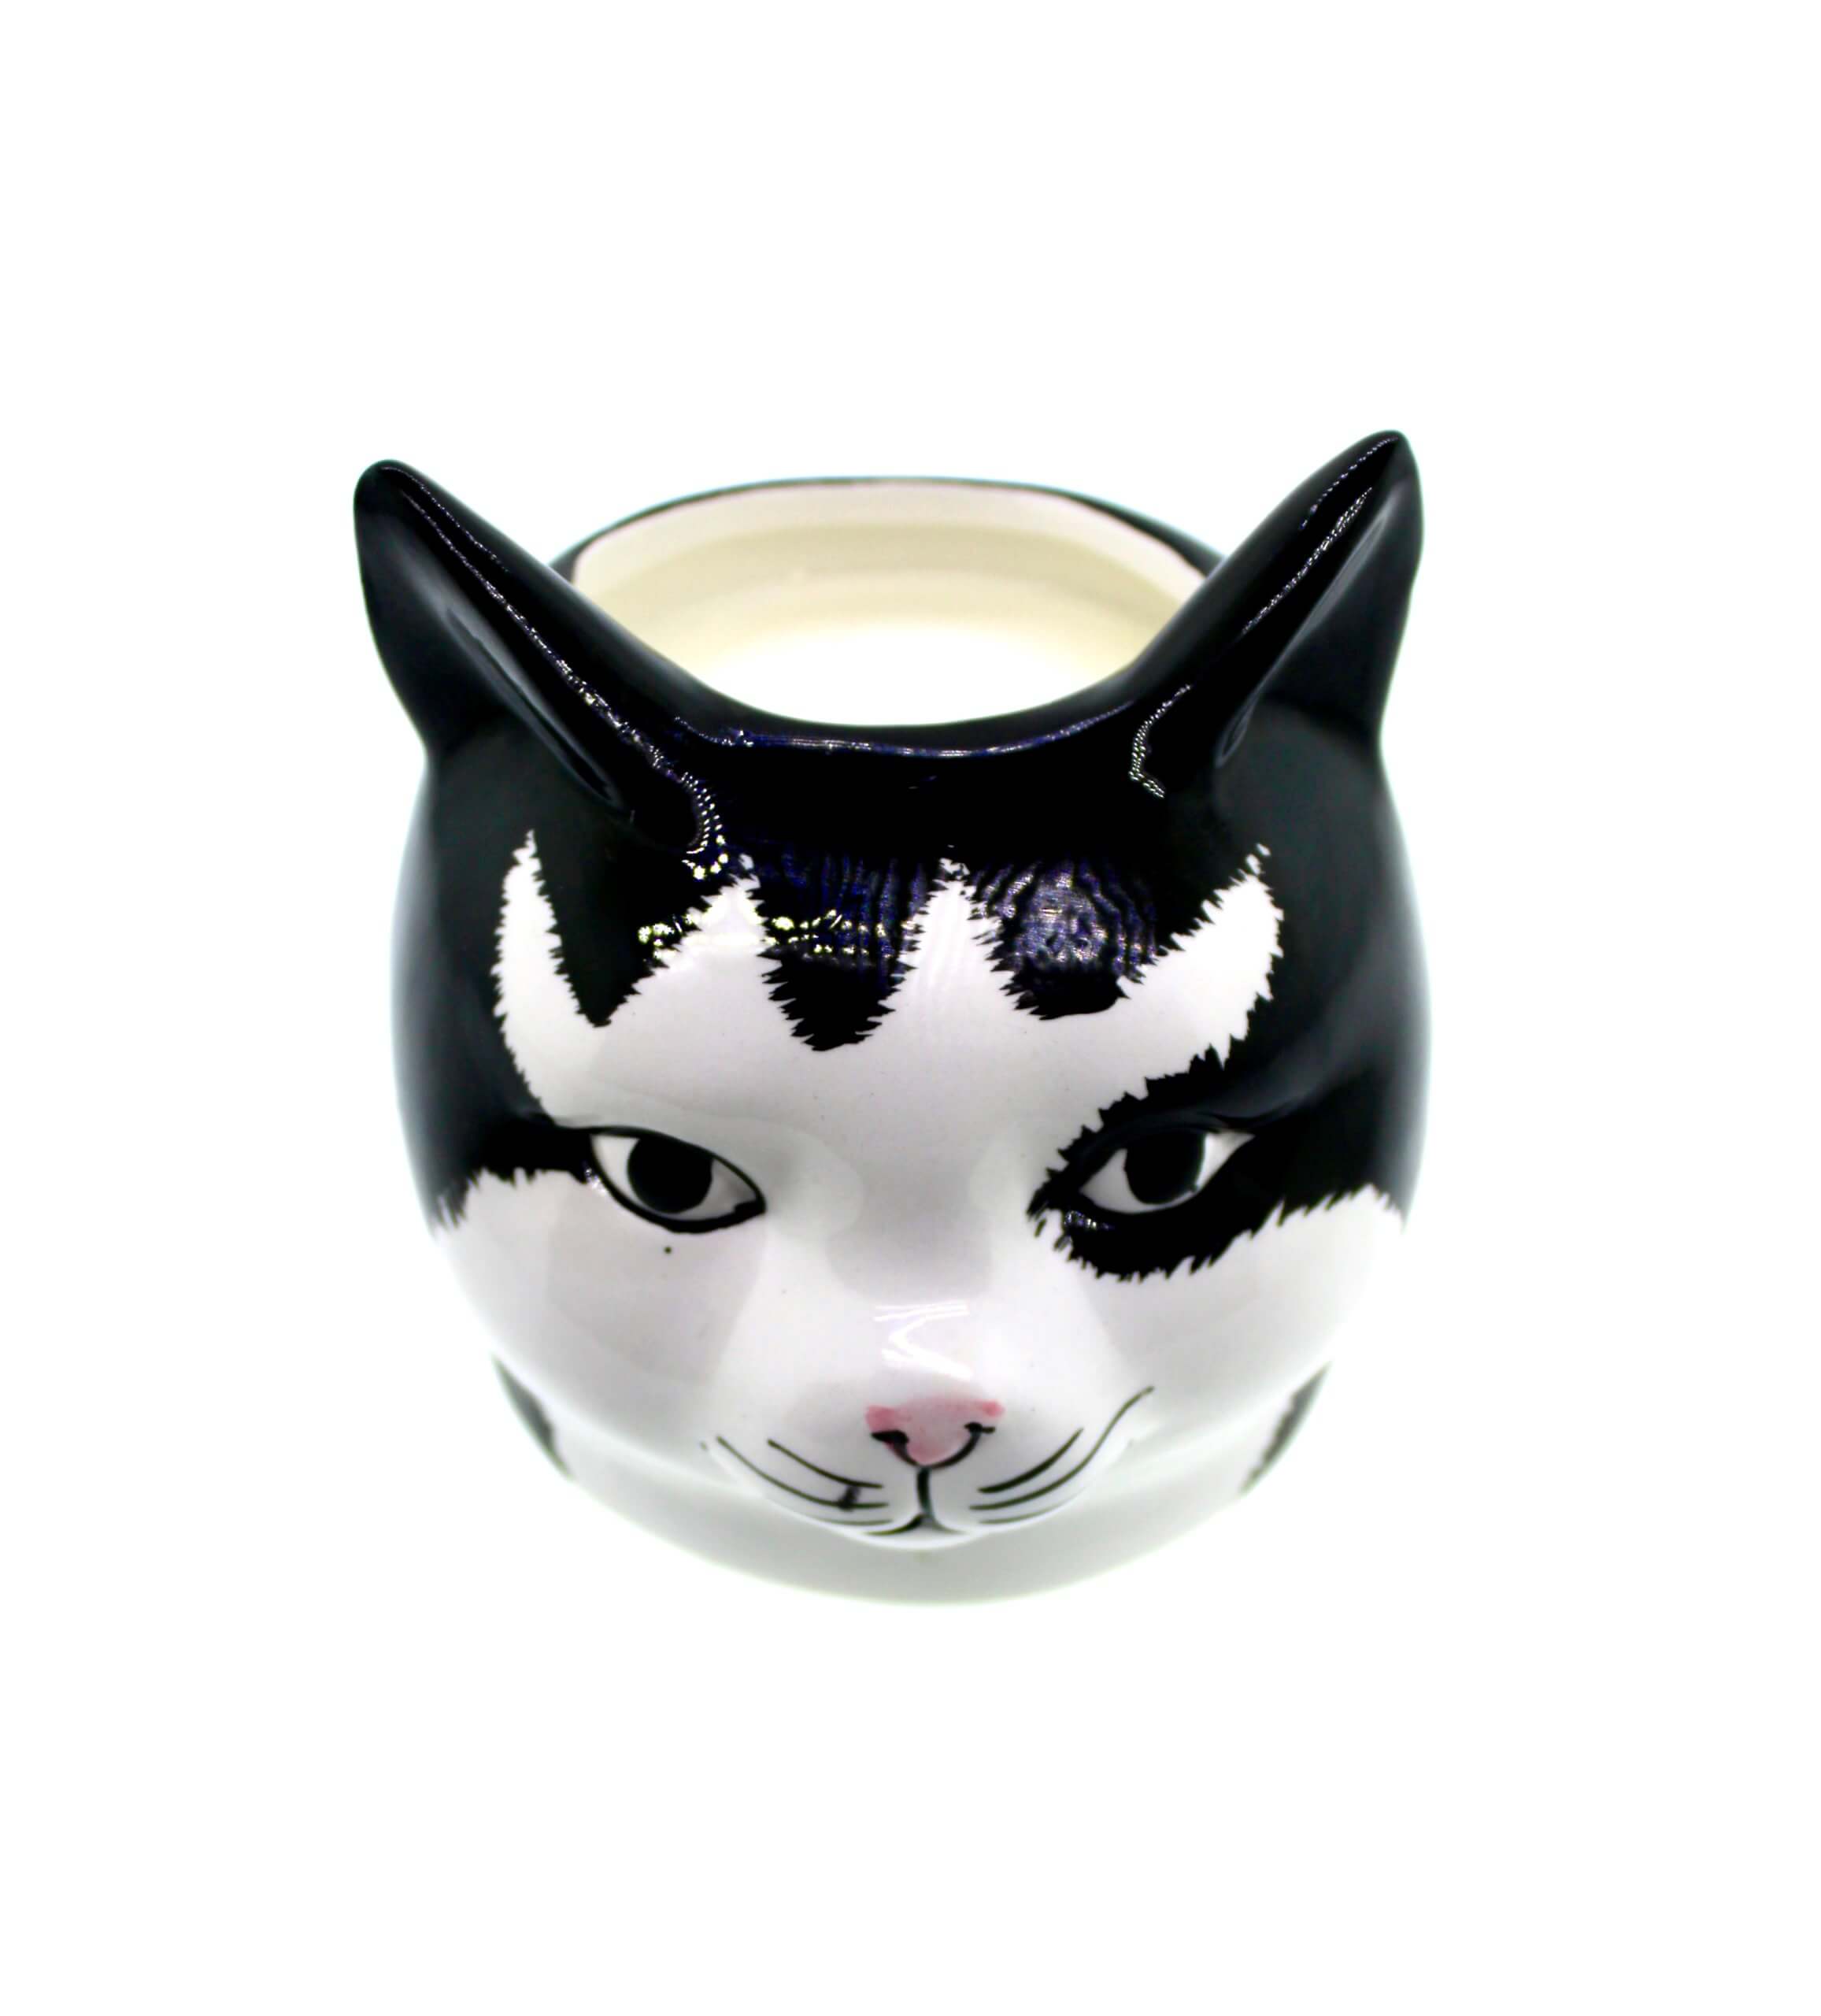 A black and white Cat Face Candle shaped candle holder.